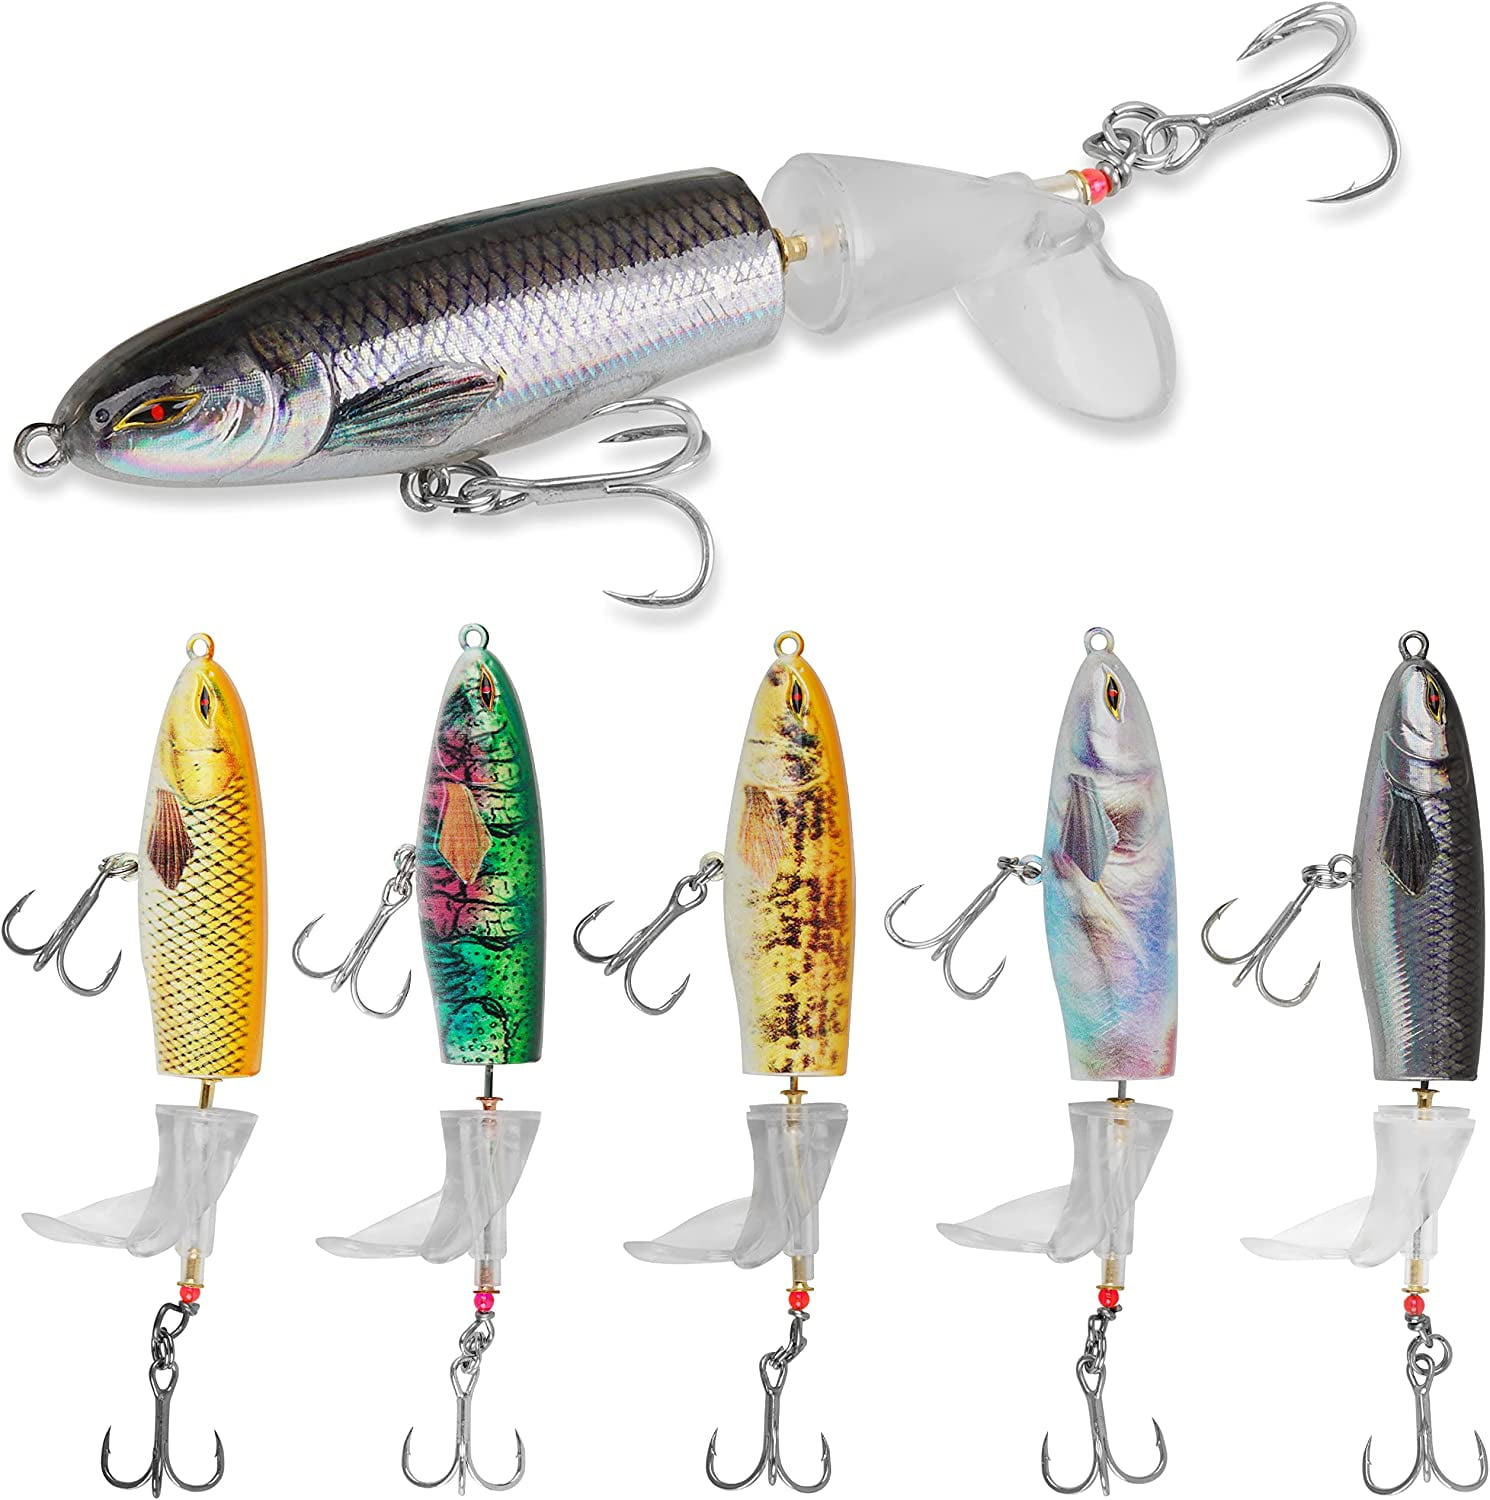  10pks Fish WOW! Size 1/0 Fishing Bait Rigs Premium Quality  Gold 6-Hook Piscatore Lure with Red Head & Glow Beads and Ball Bearing  Swivel Interlock snap connectors : Sports & Outdoors